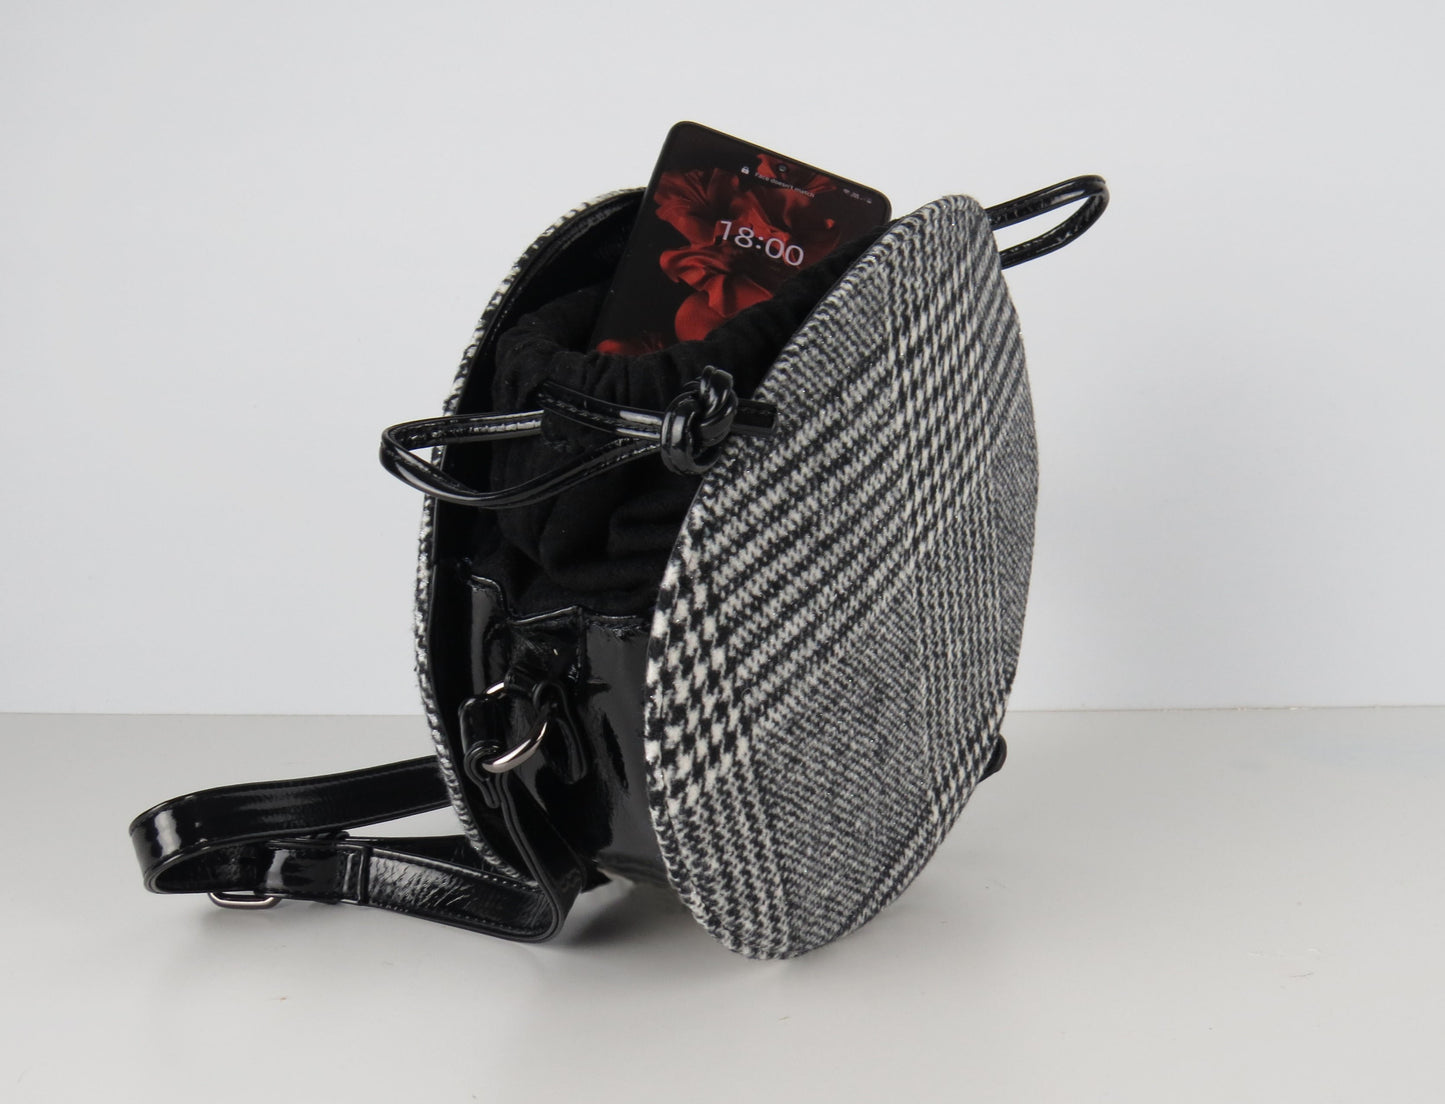 Retro styled Black And White Tweed patterned Round Crossbody bag